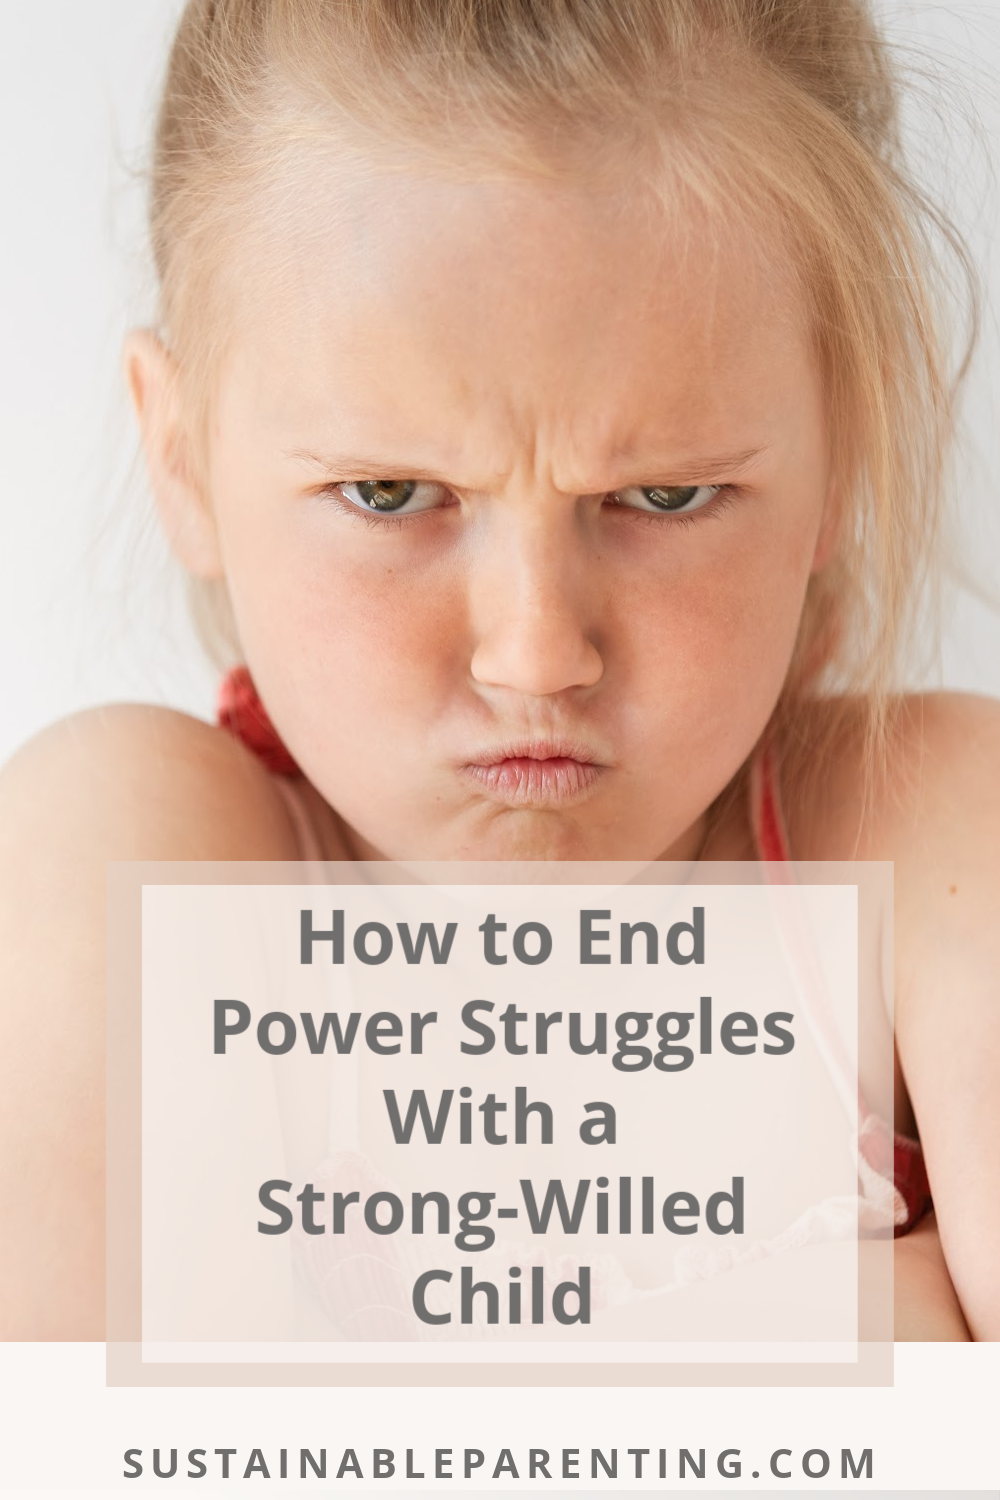 How To End Power Struggles With A Strong-willed Child